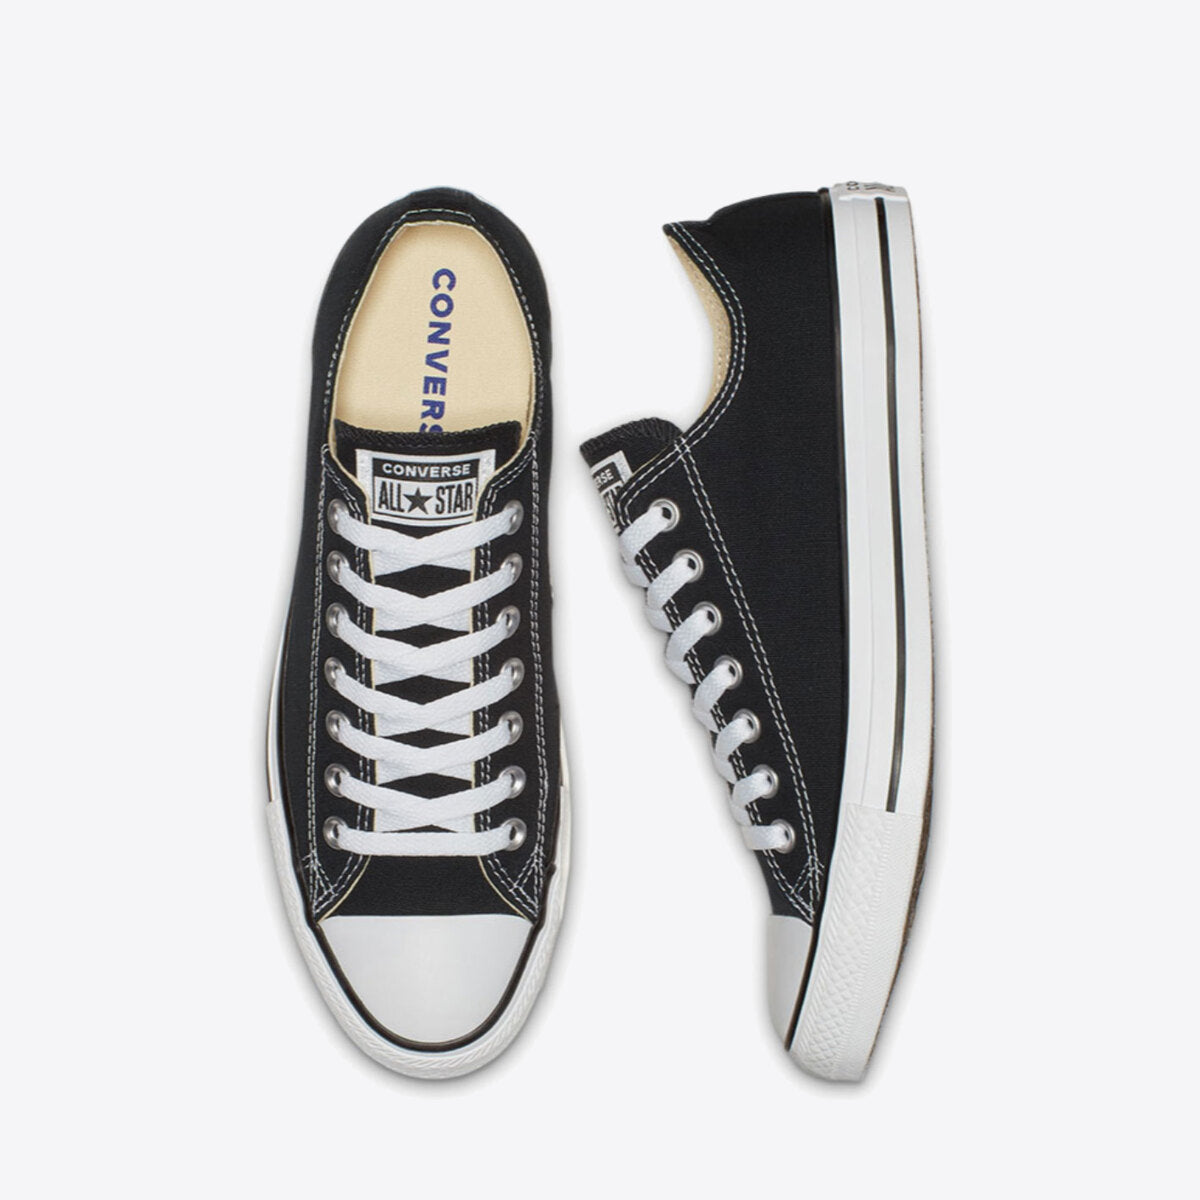  Chuck Taylor All Star Canvas Low Top Black